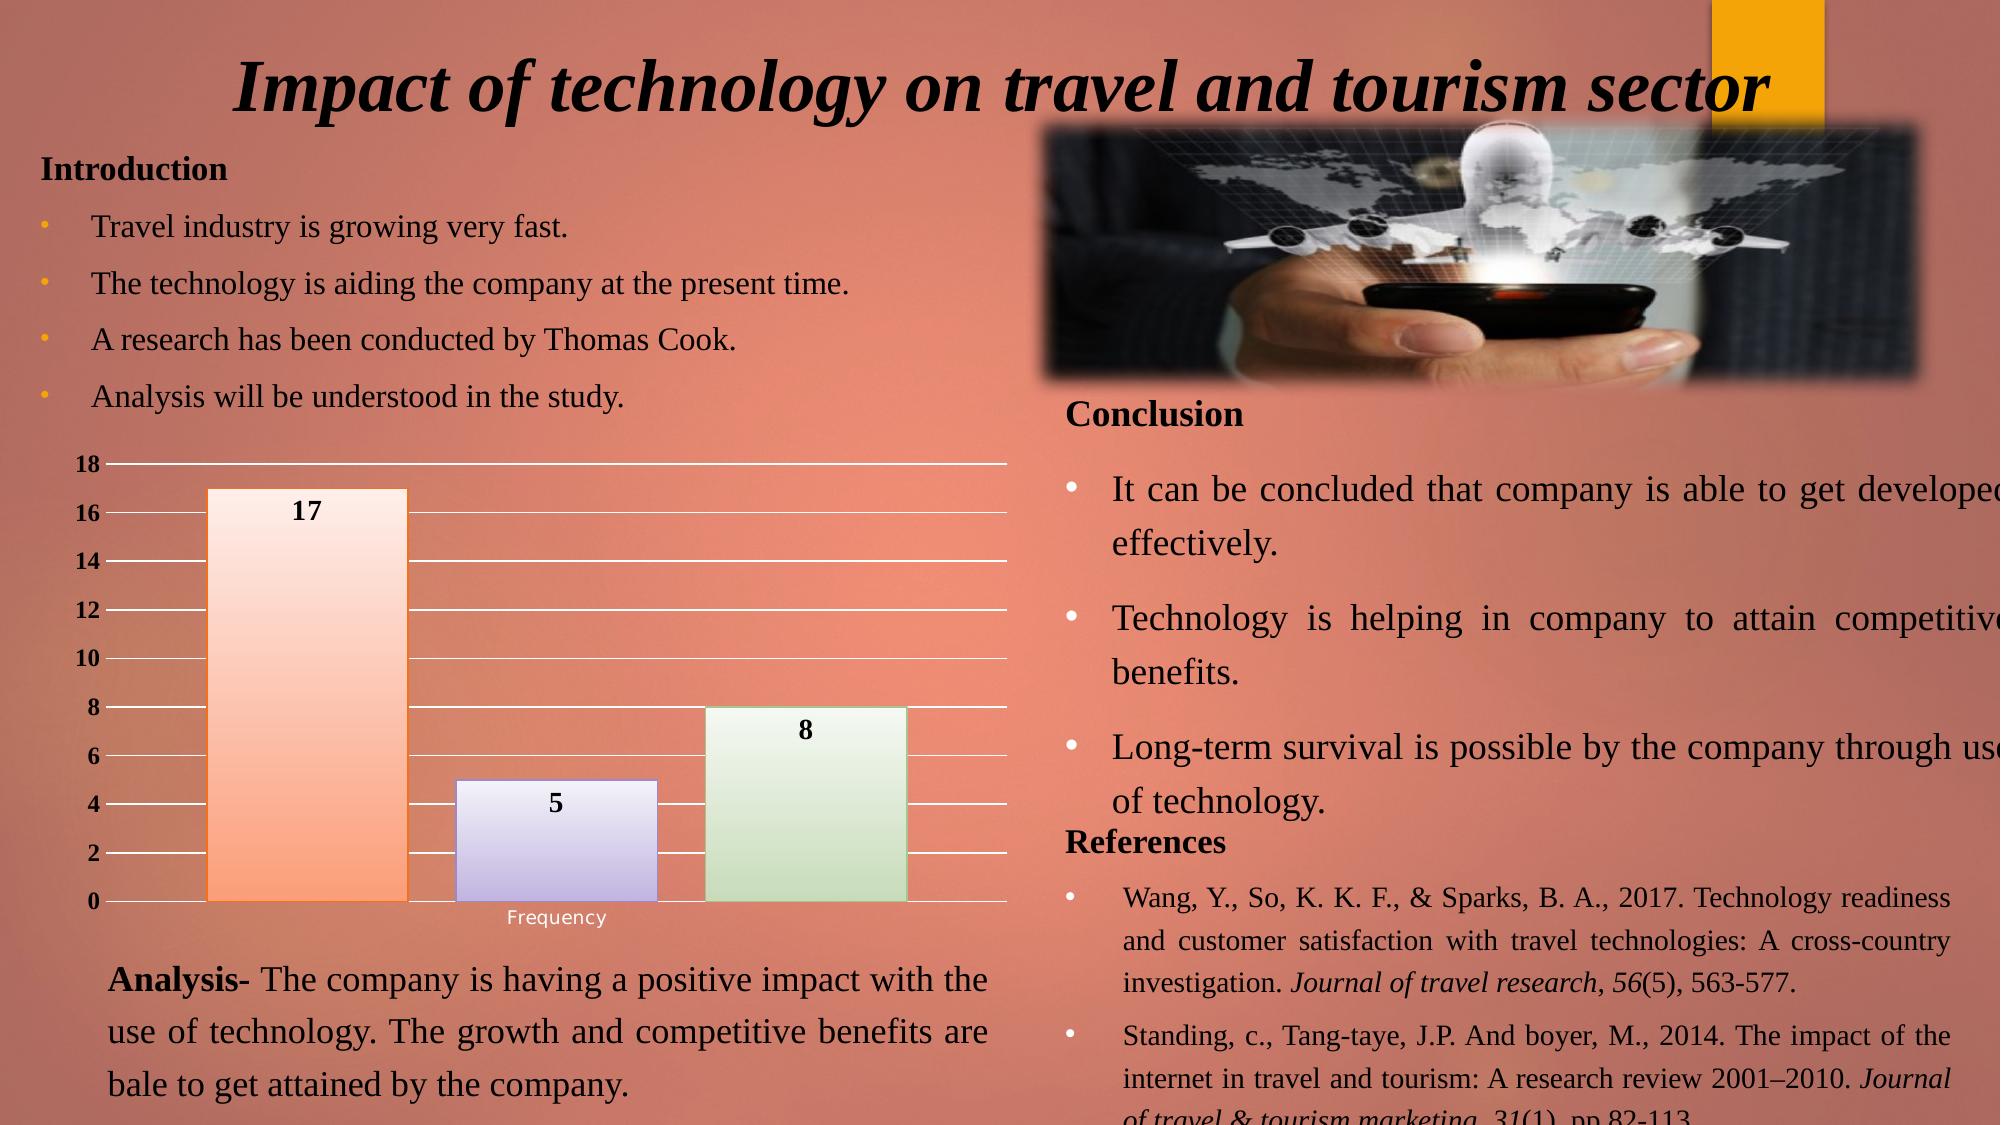 Impact of Technology on Travel and Tourism Sector_1